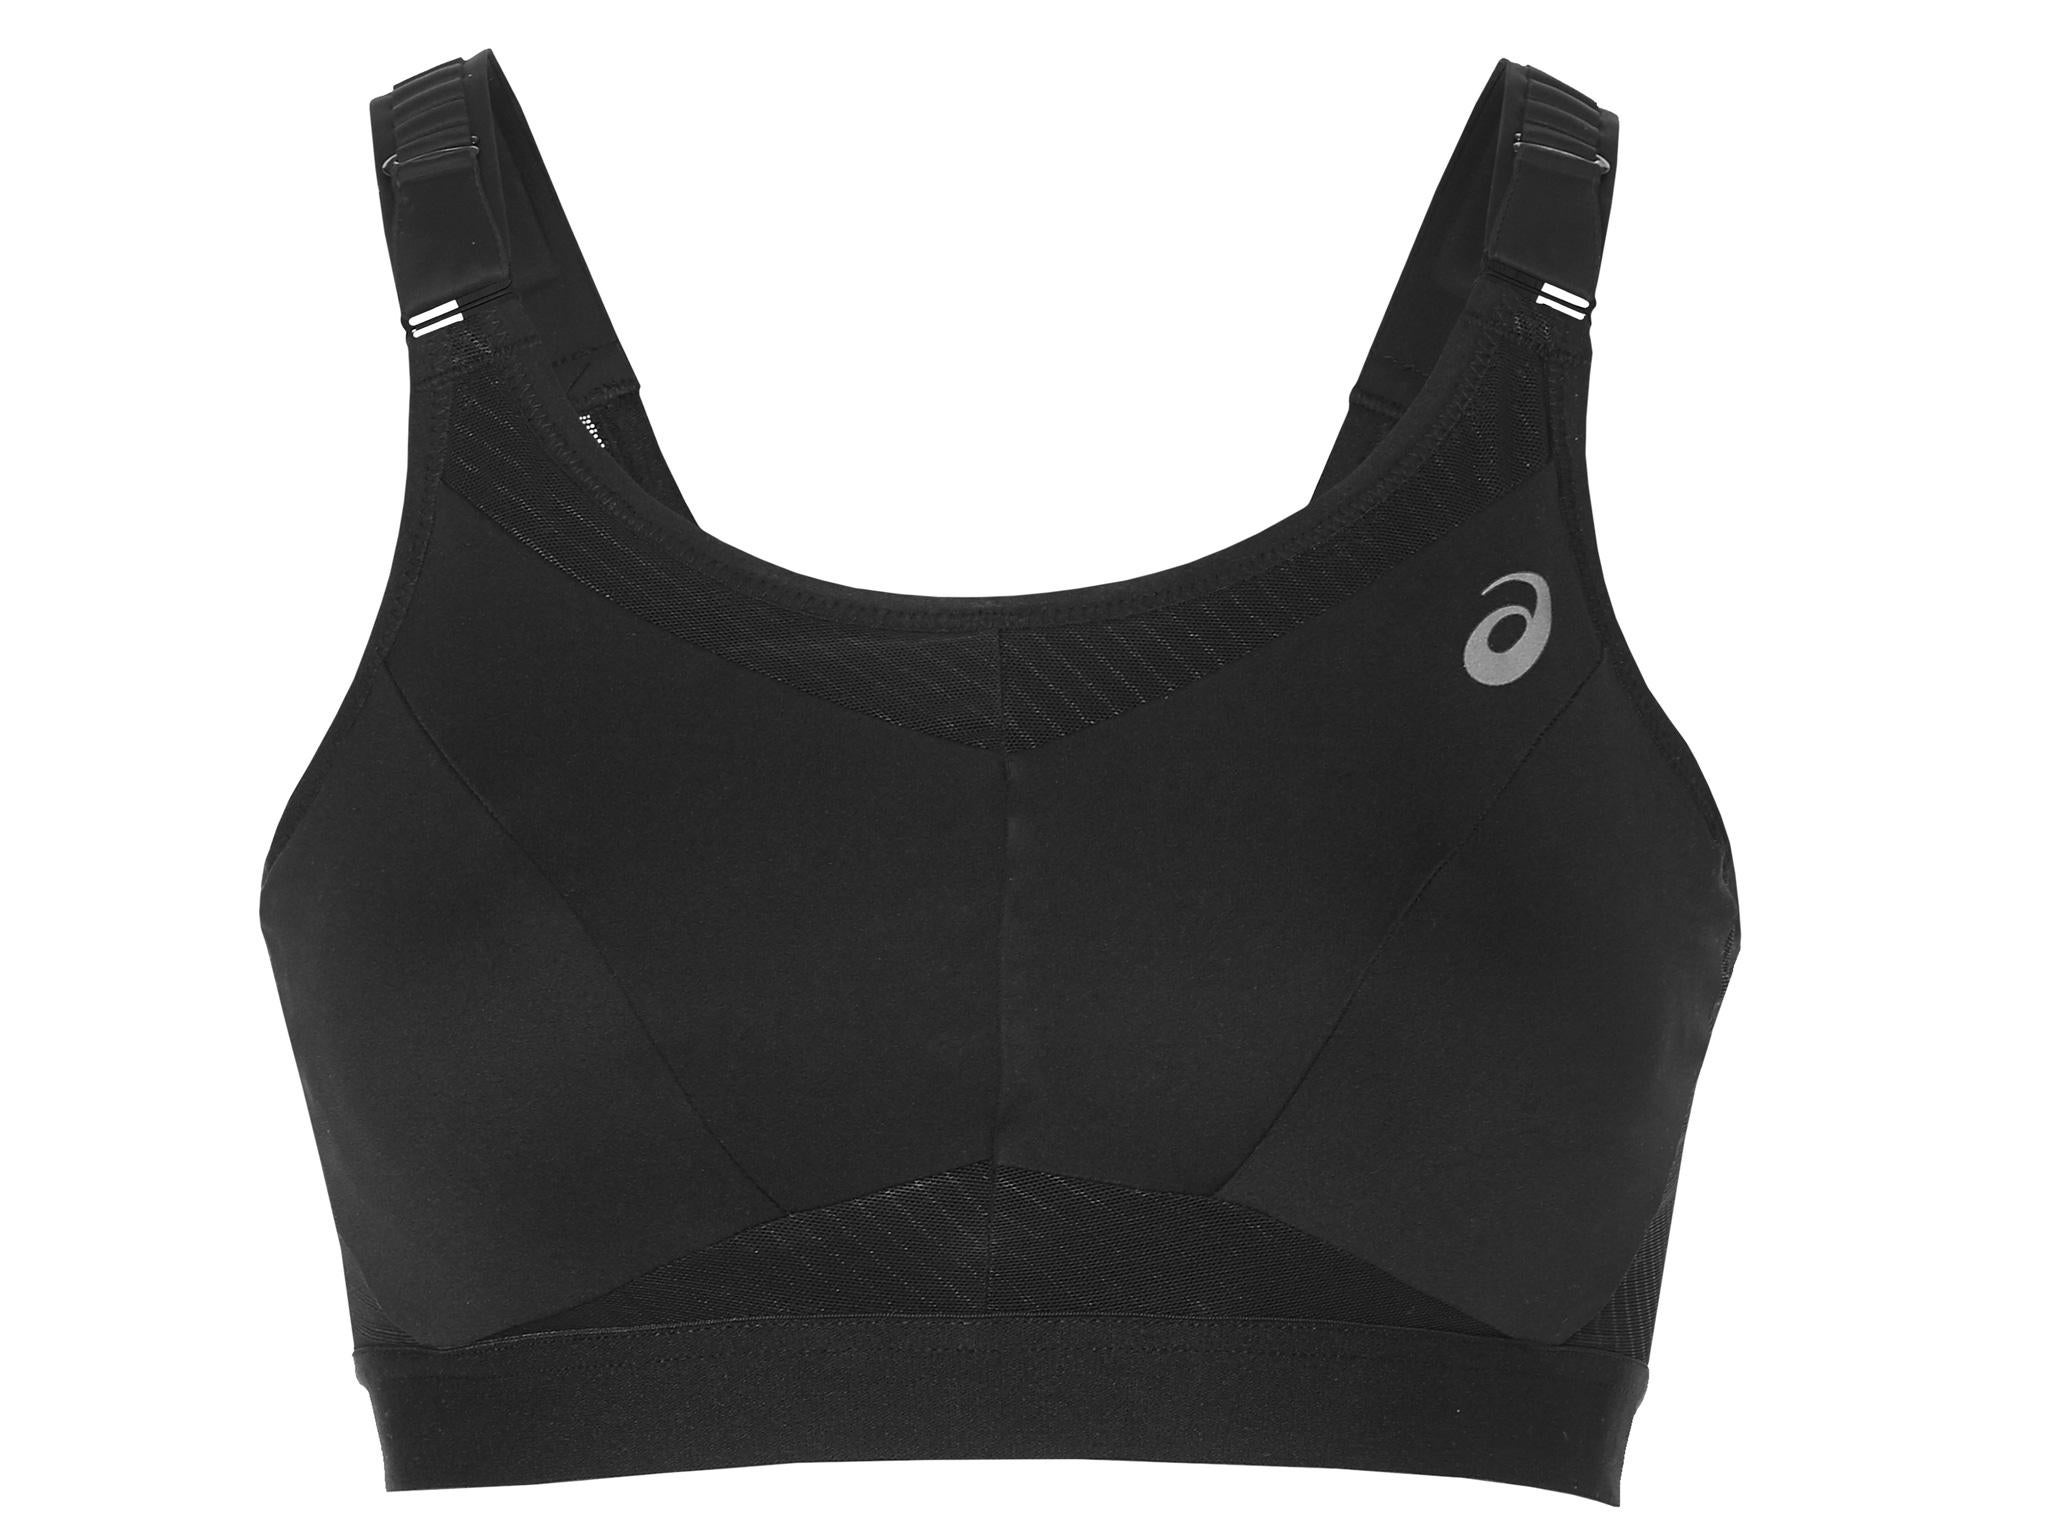 Best sports bras for running – Nautica's Fashion and Beauty